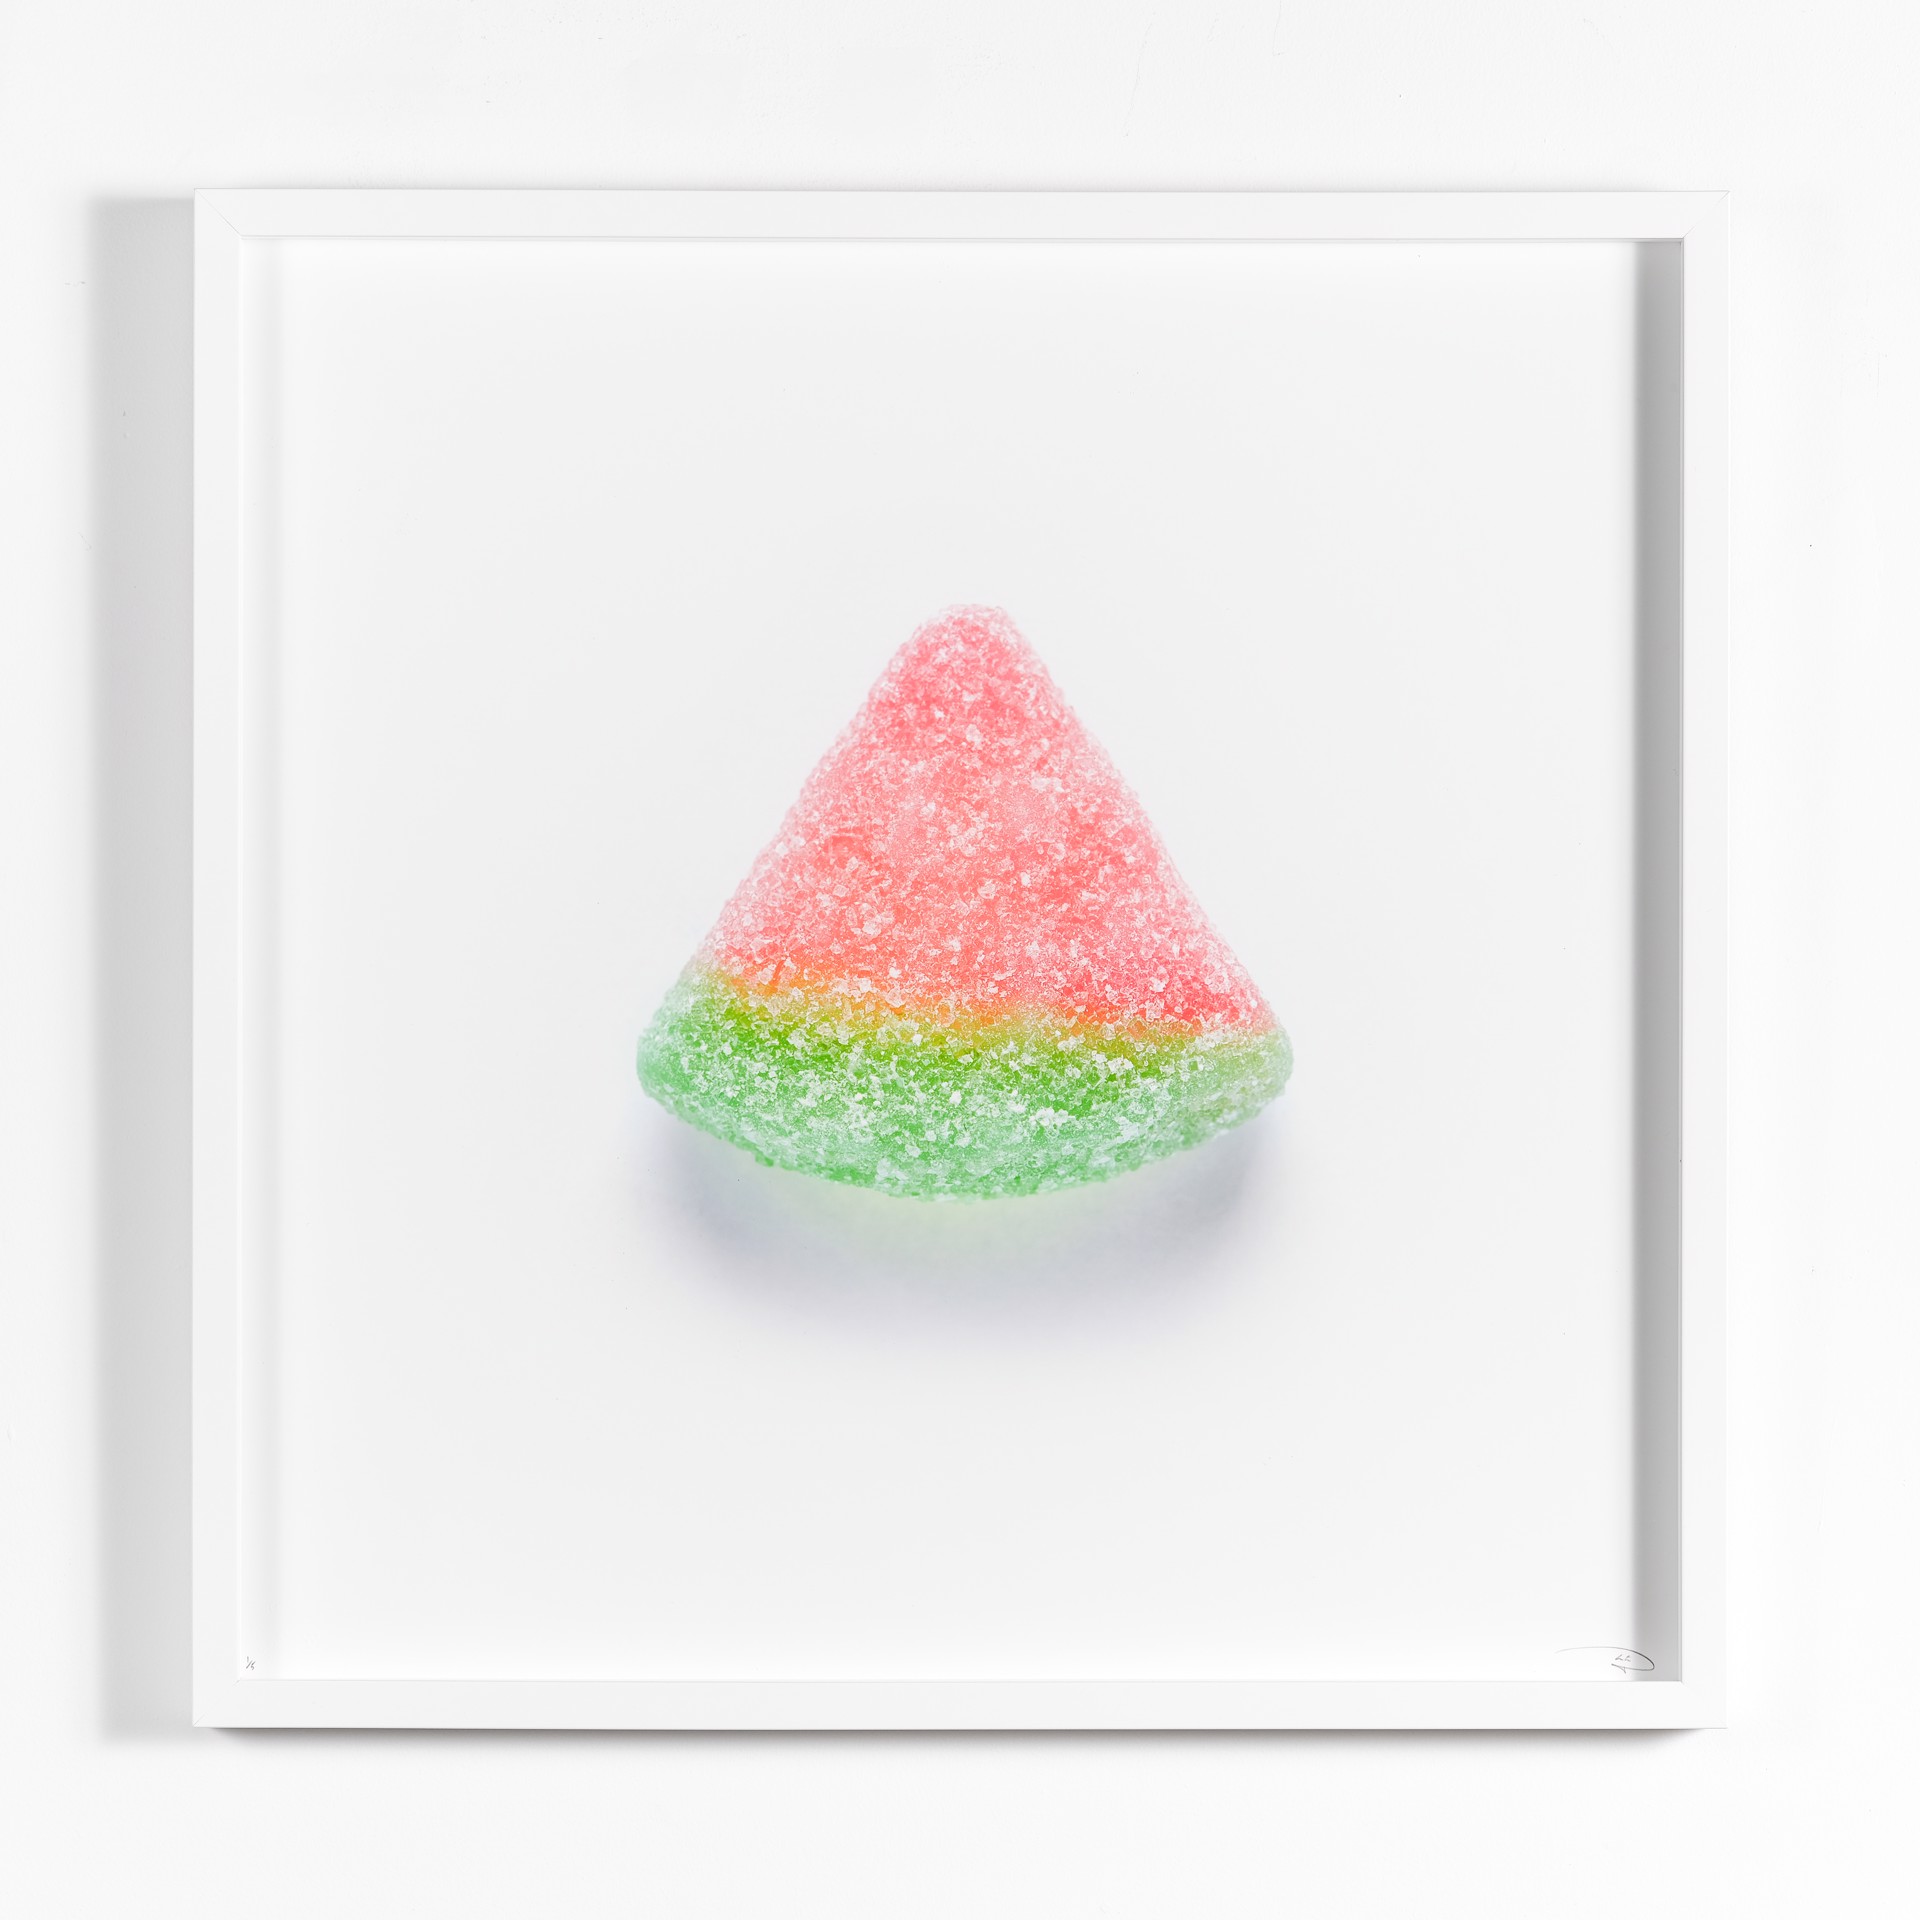 Sour Watermelon by Peter Andrew Lusztyk / Refined Sugar